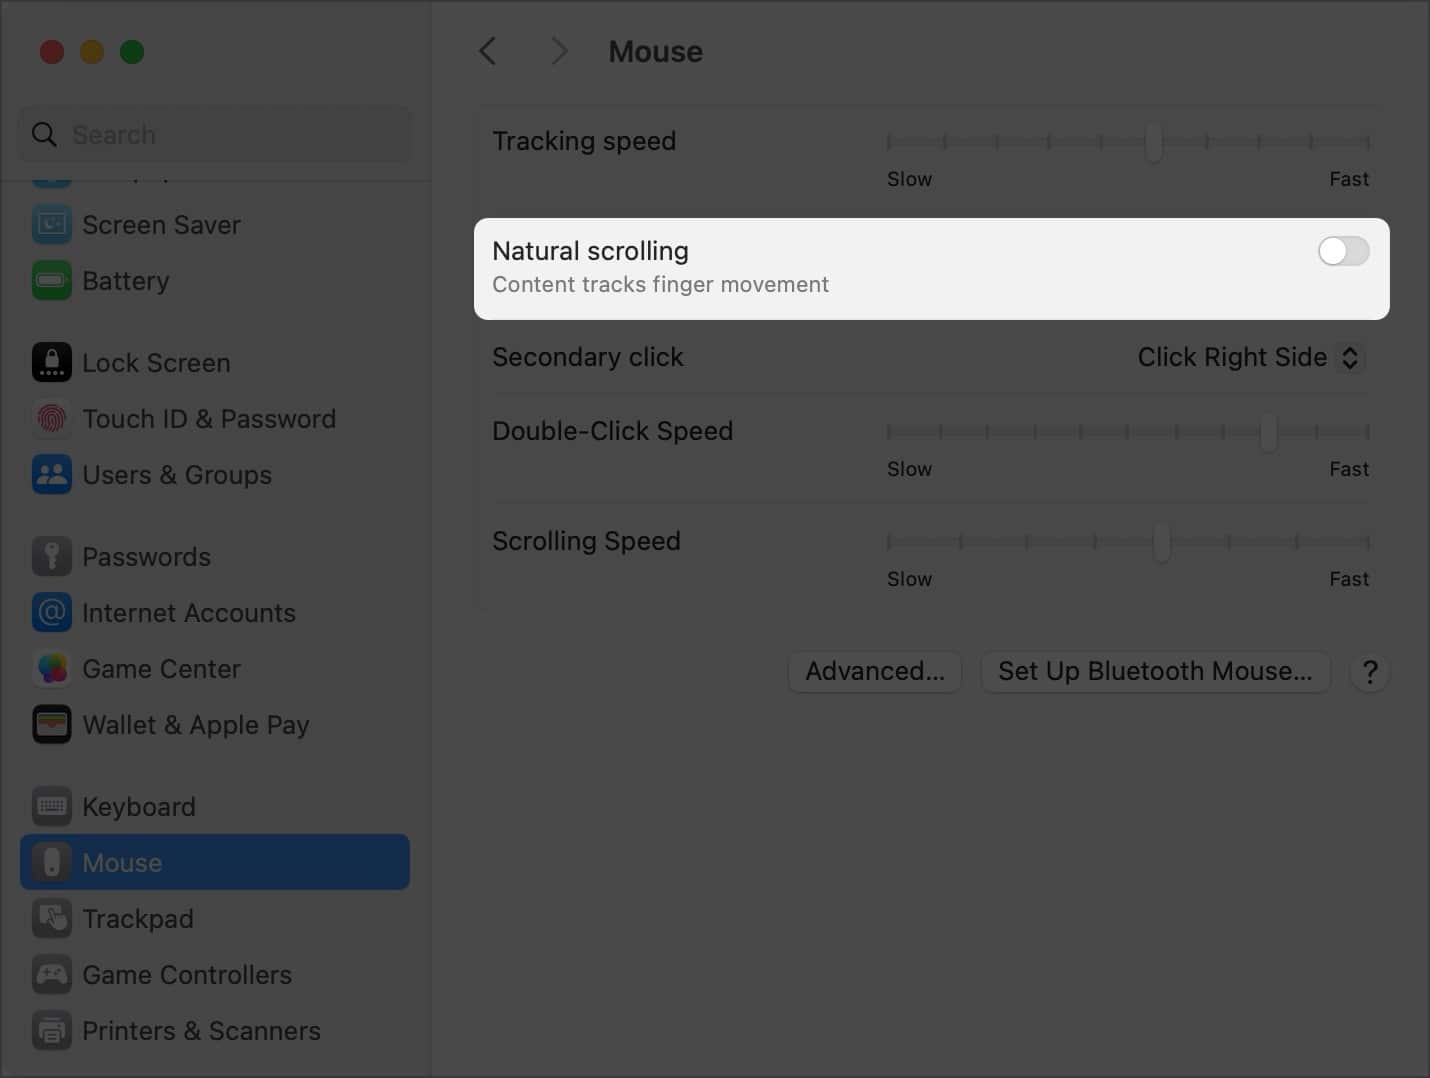 Turn off Natural Scrolling in Mouse settings